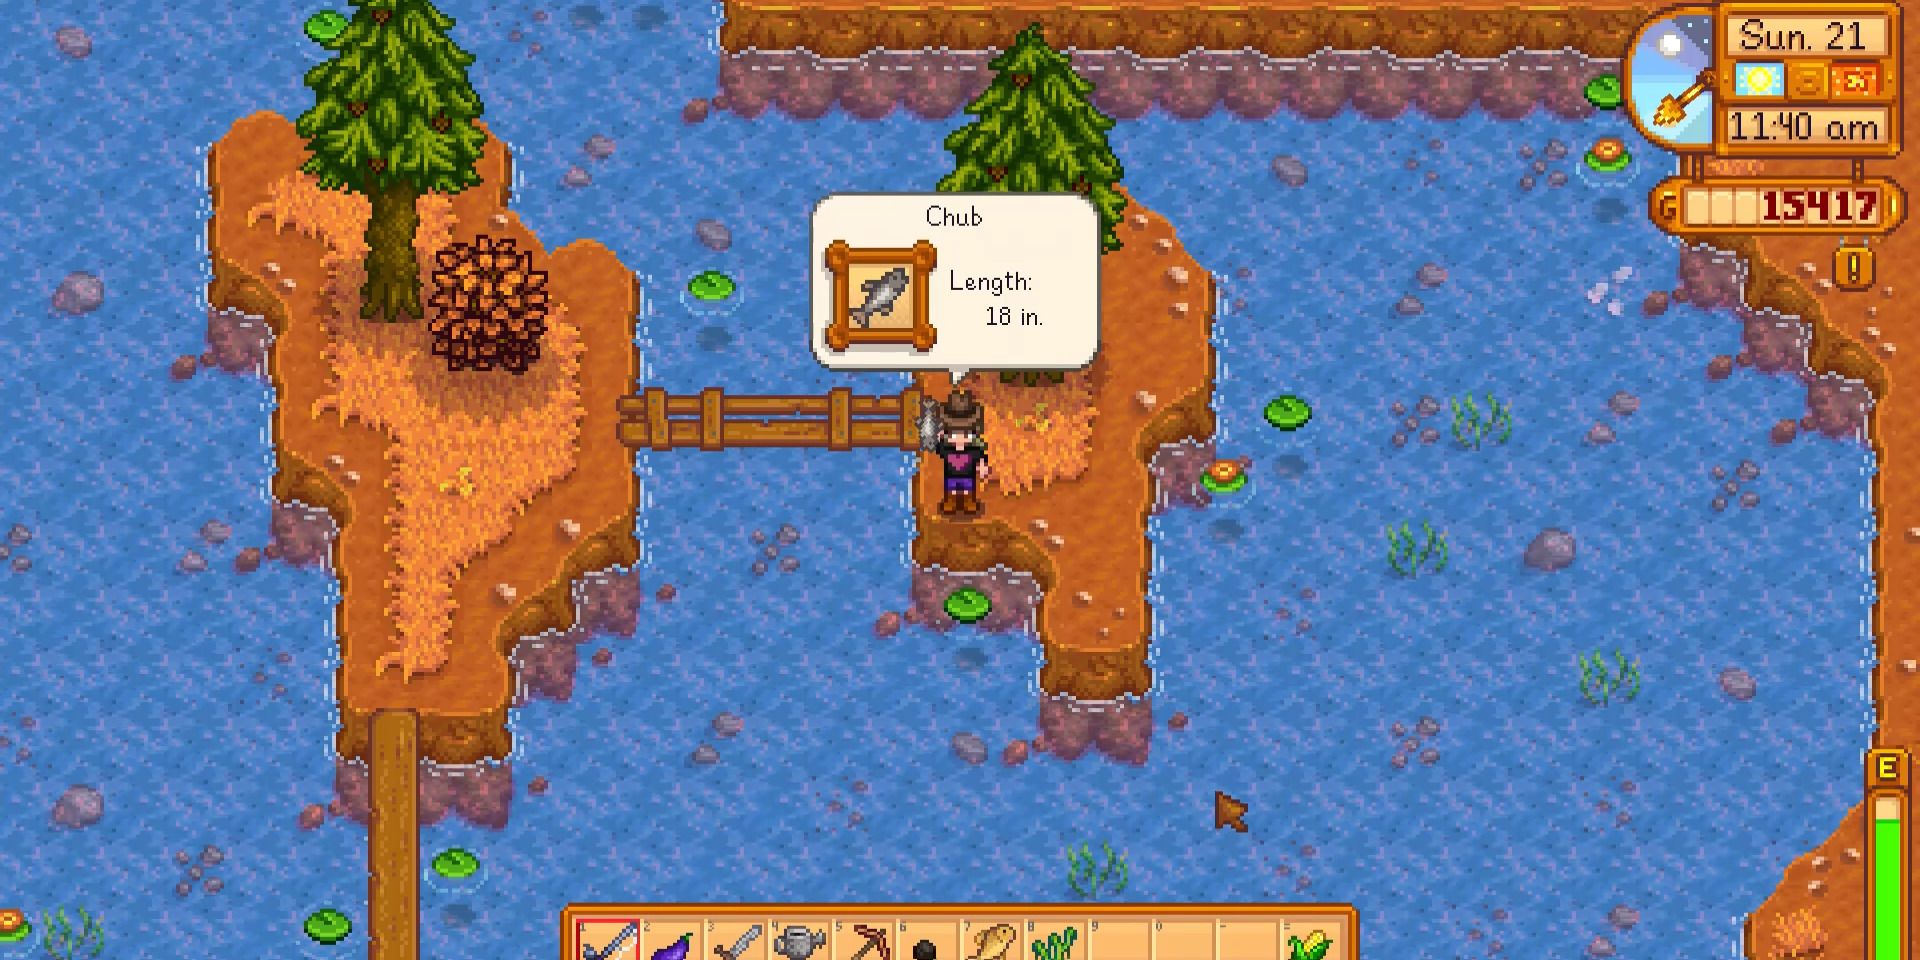 Image of a character after catching a Chub in Stardew Valley